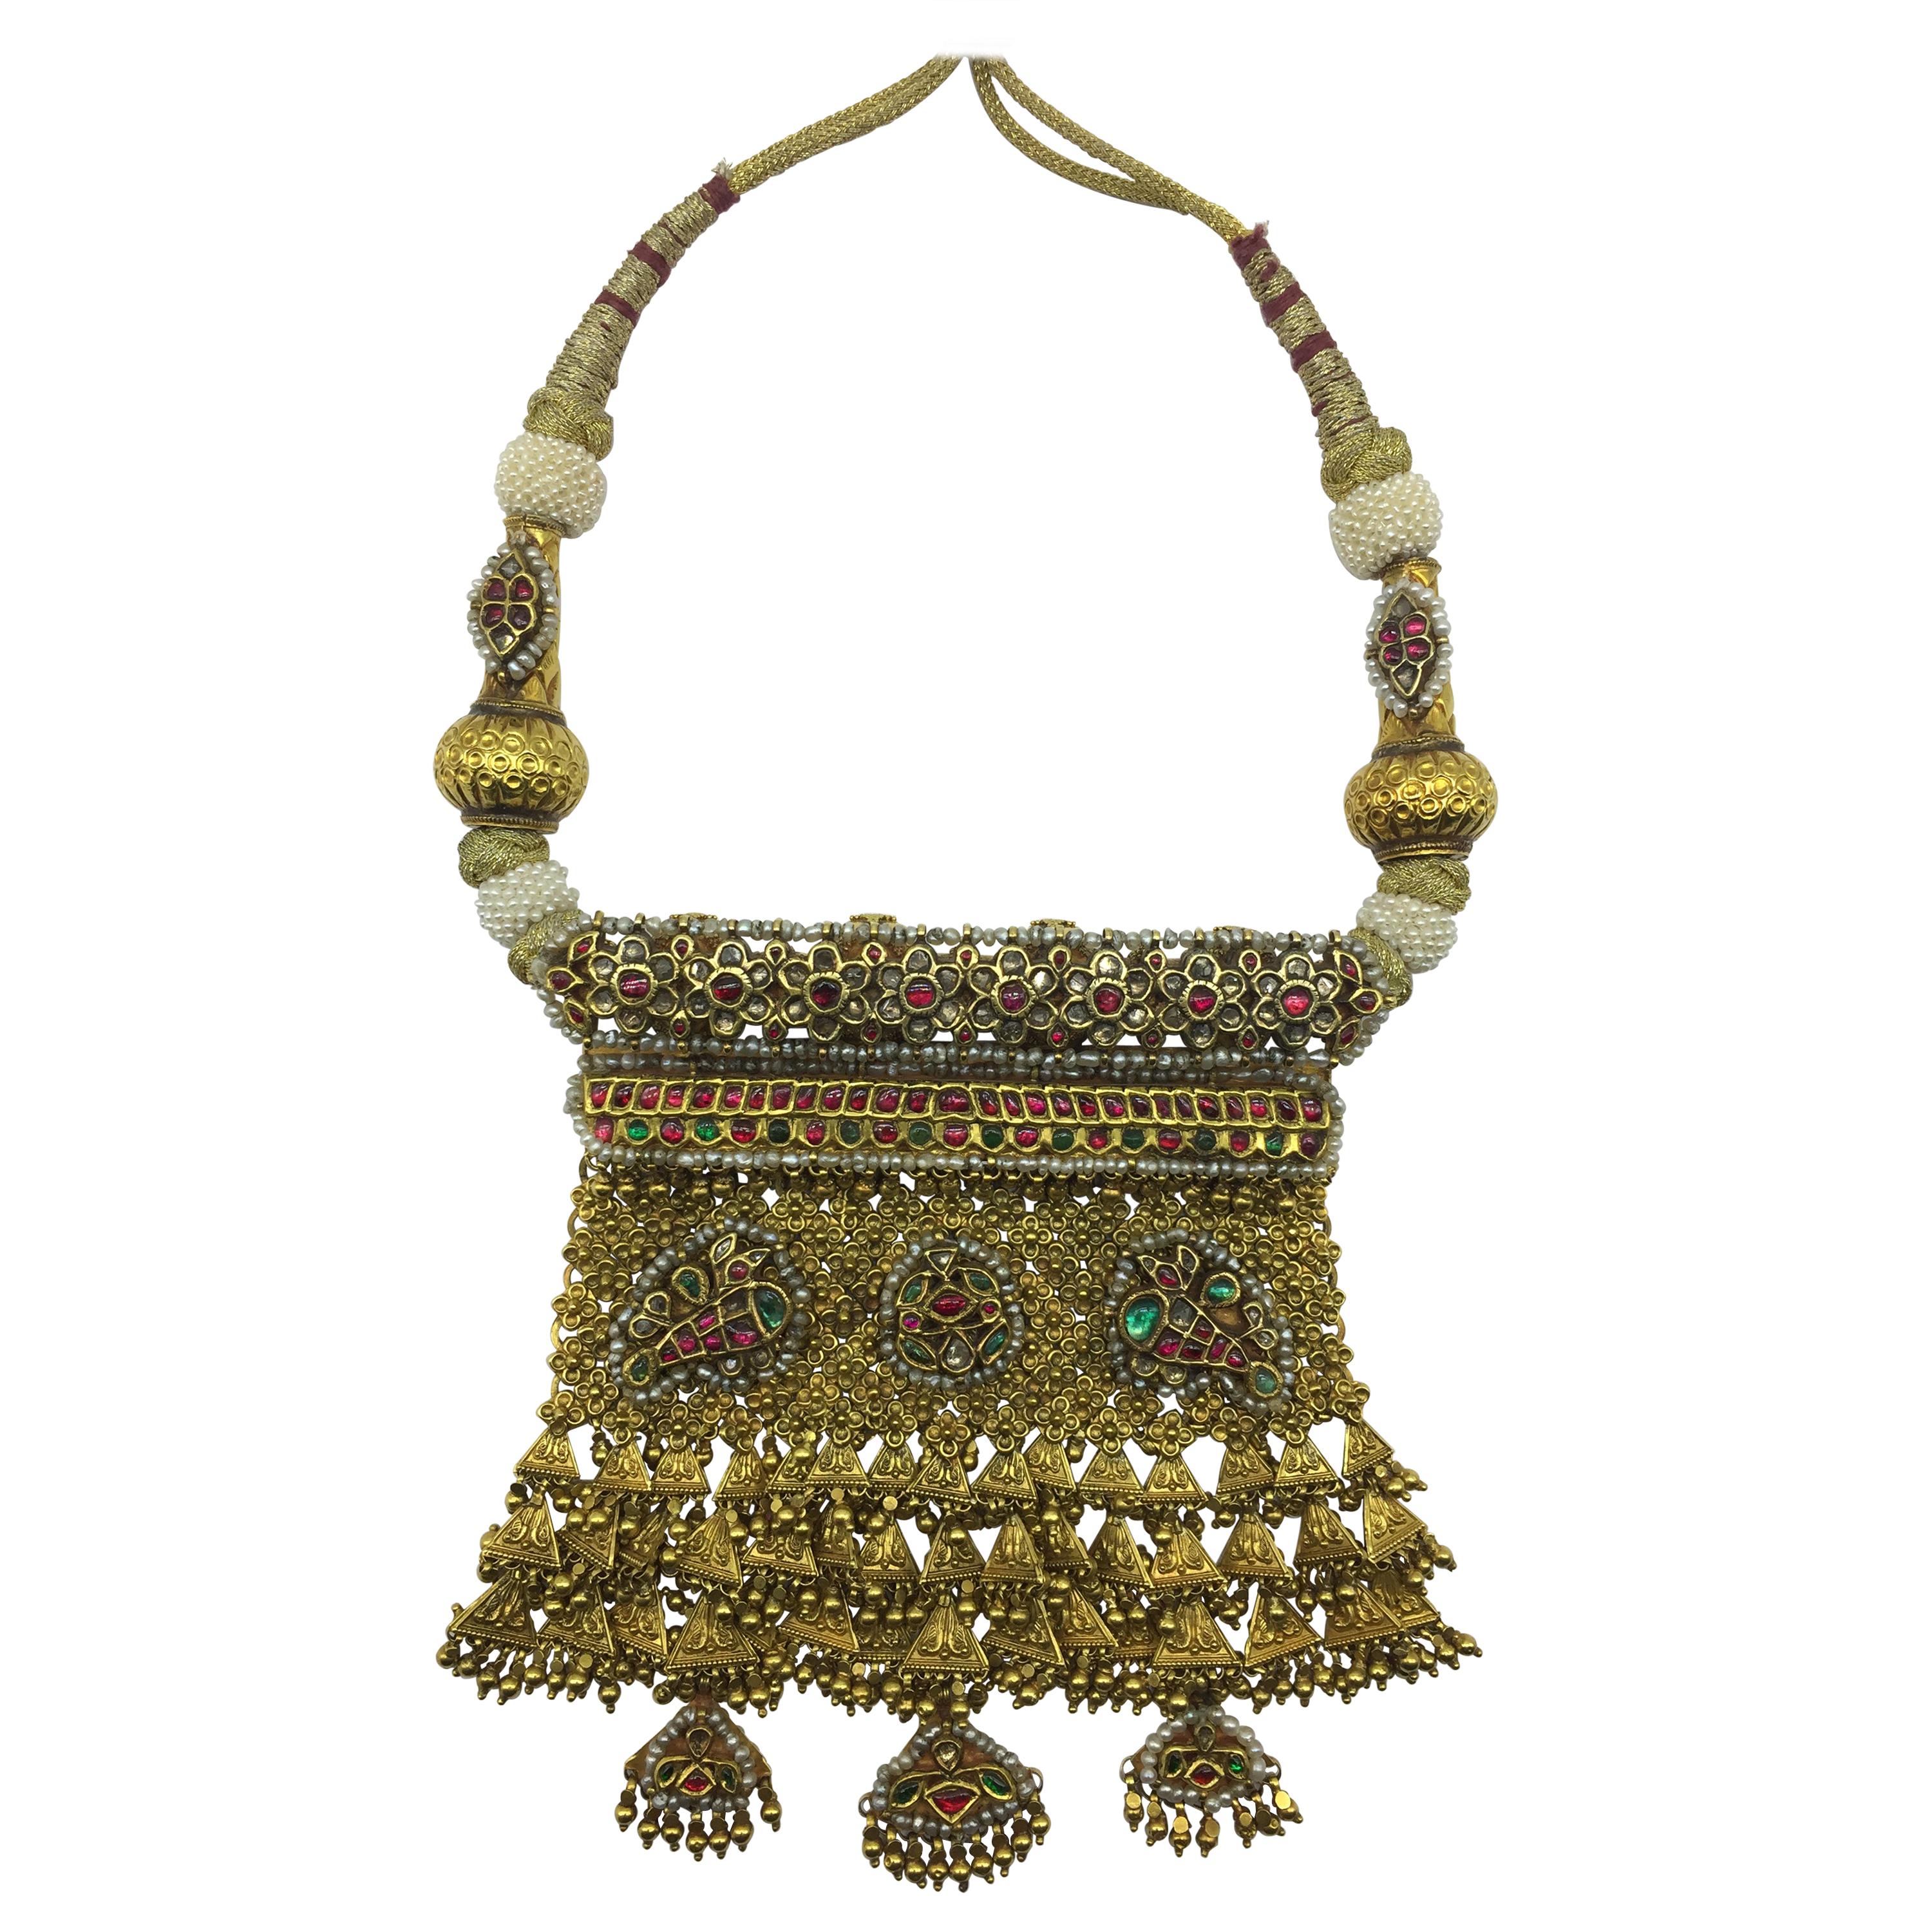 Indian Handcrafted Necklace in 22k Gold, Diamonds, Natural Pearls, Emerald, Ruby